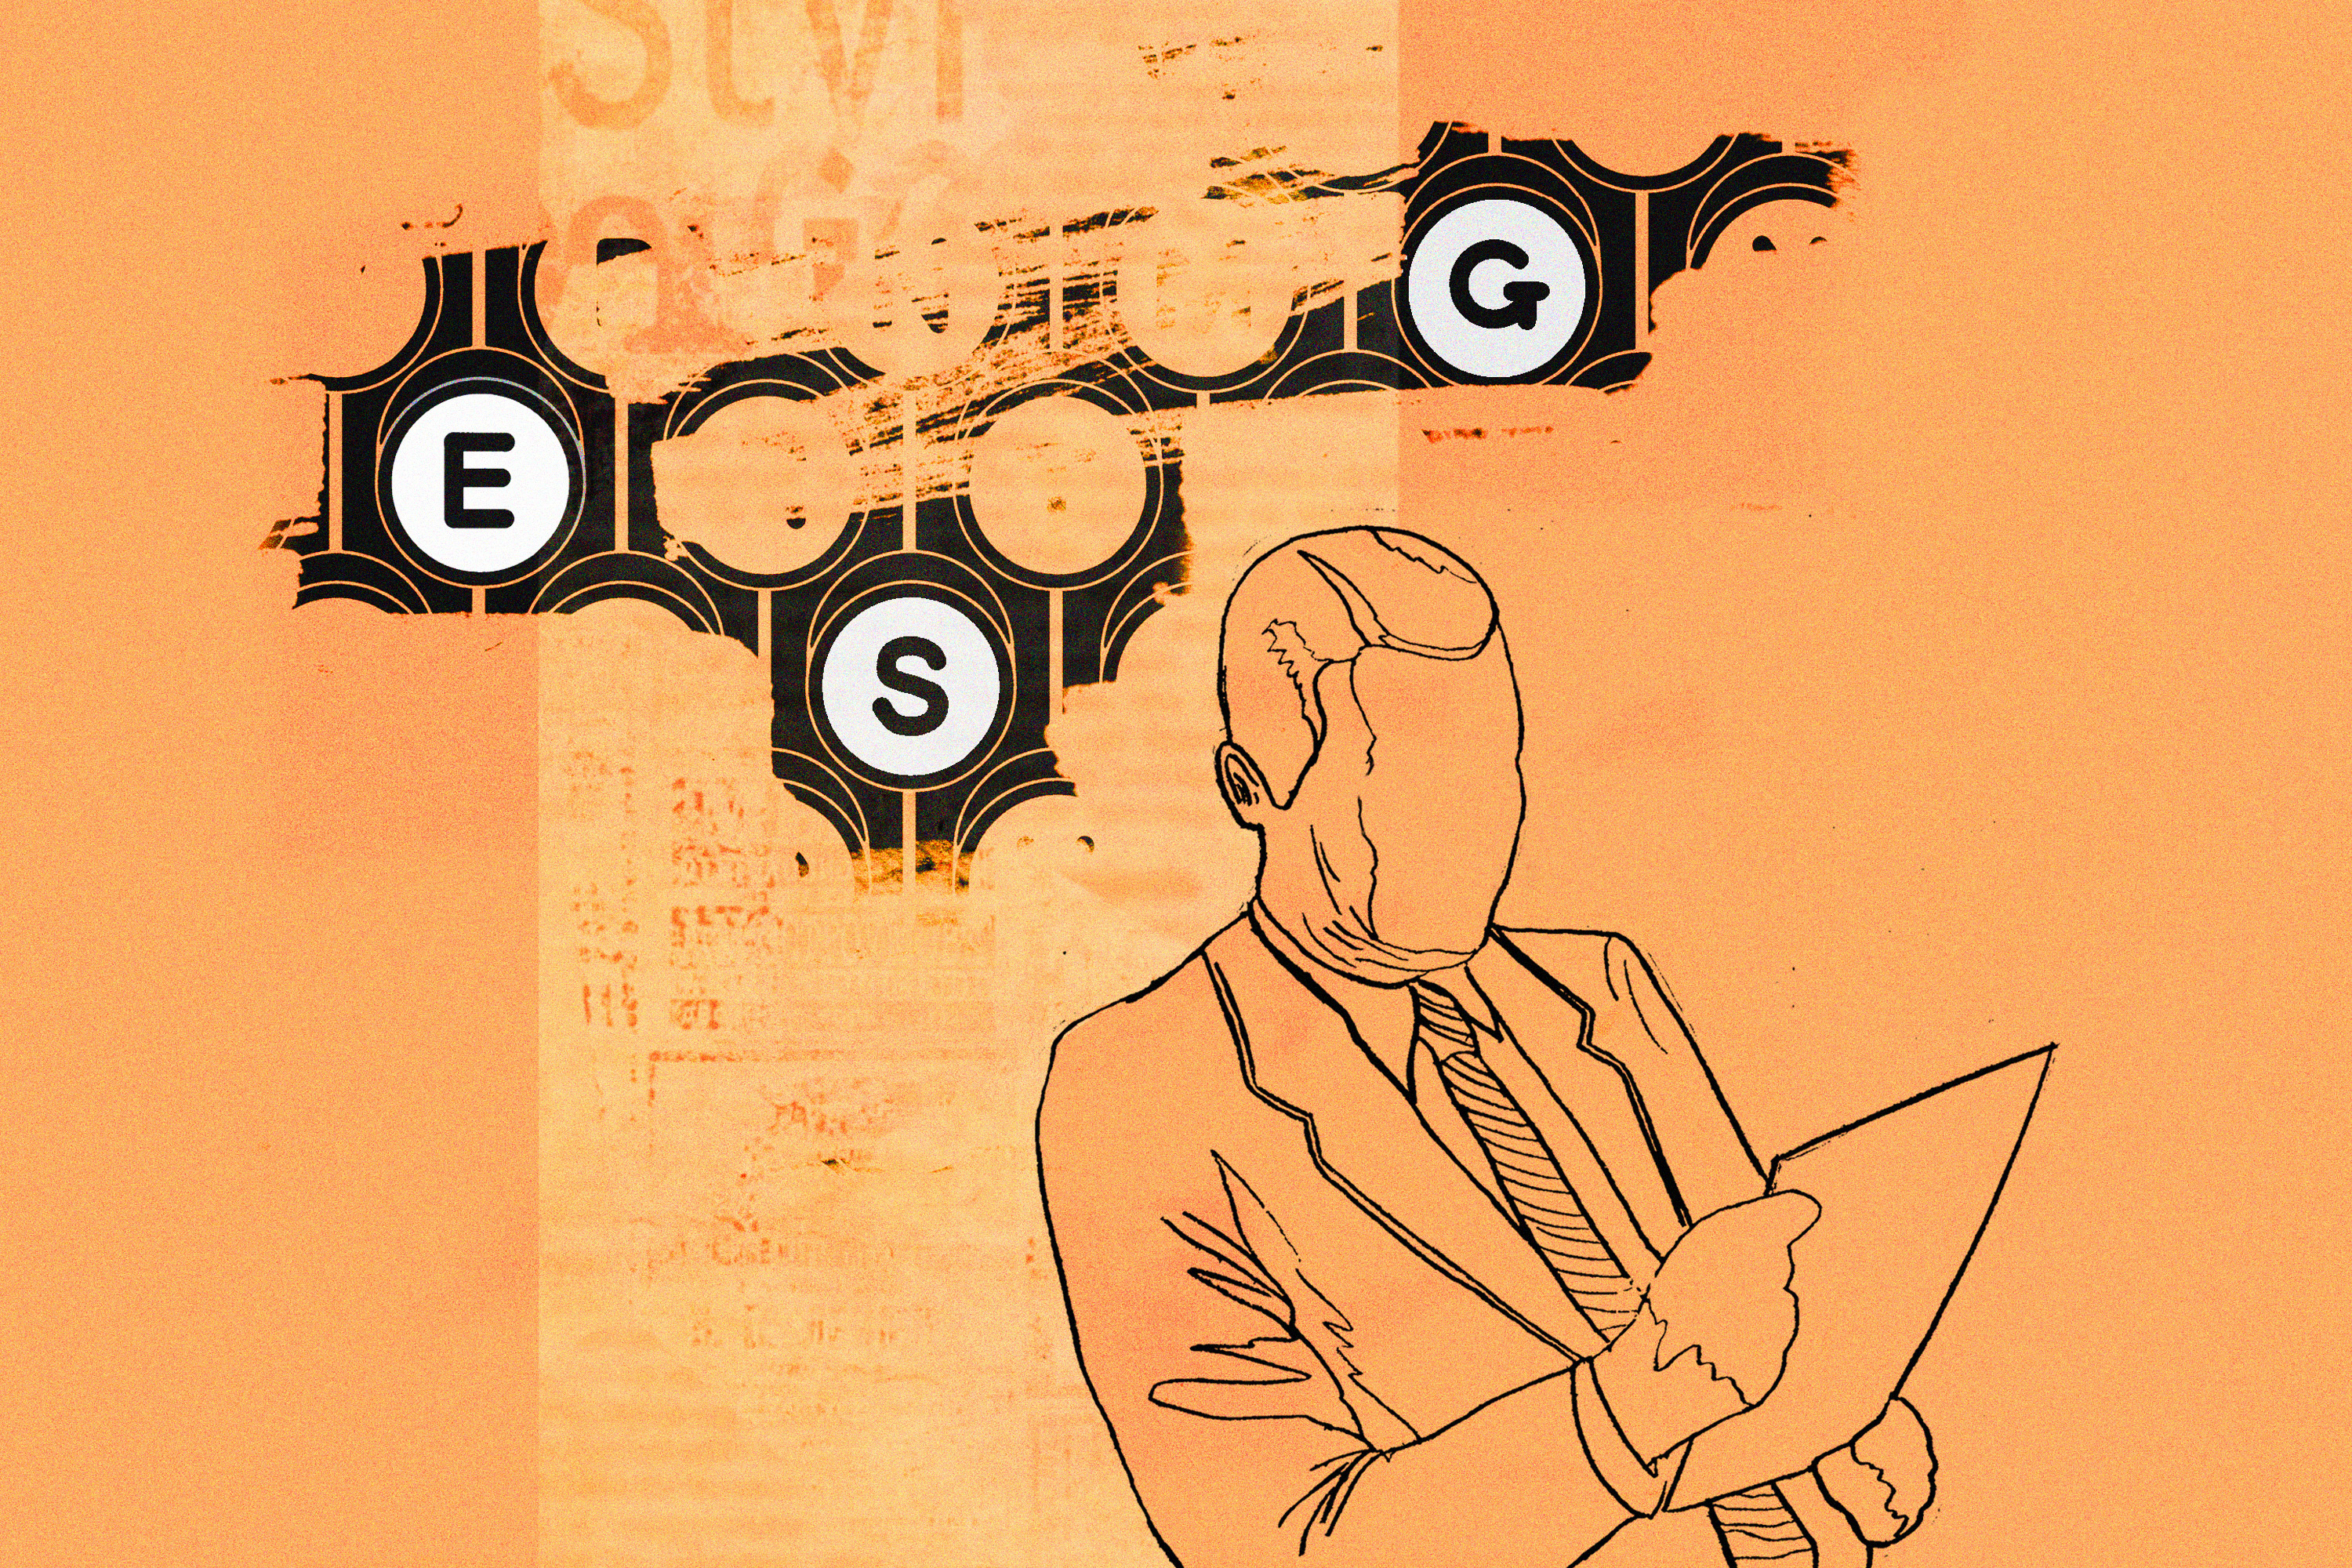 An illustration in a rusty orange color shows the outline of a businessman in suit and tie looking at a piece of paper; behind him are the letters “ESG.”